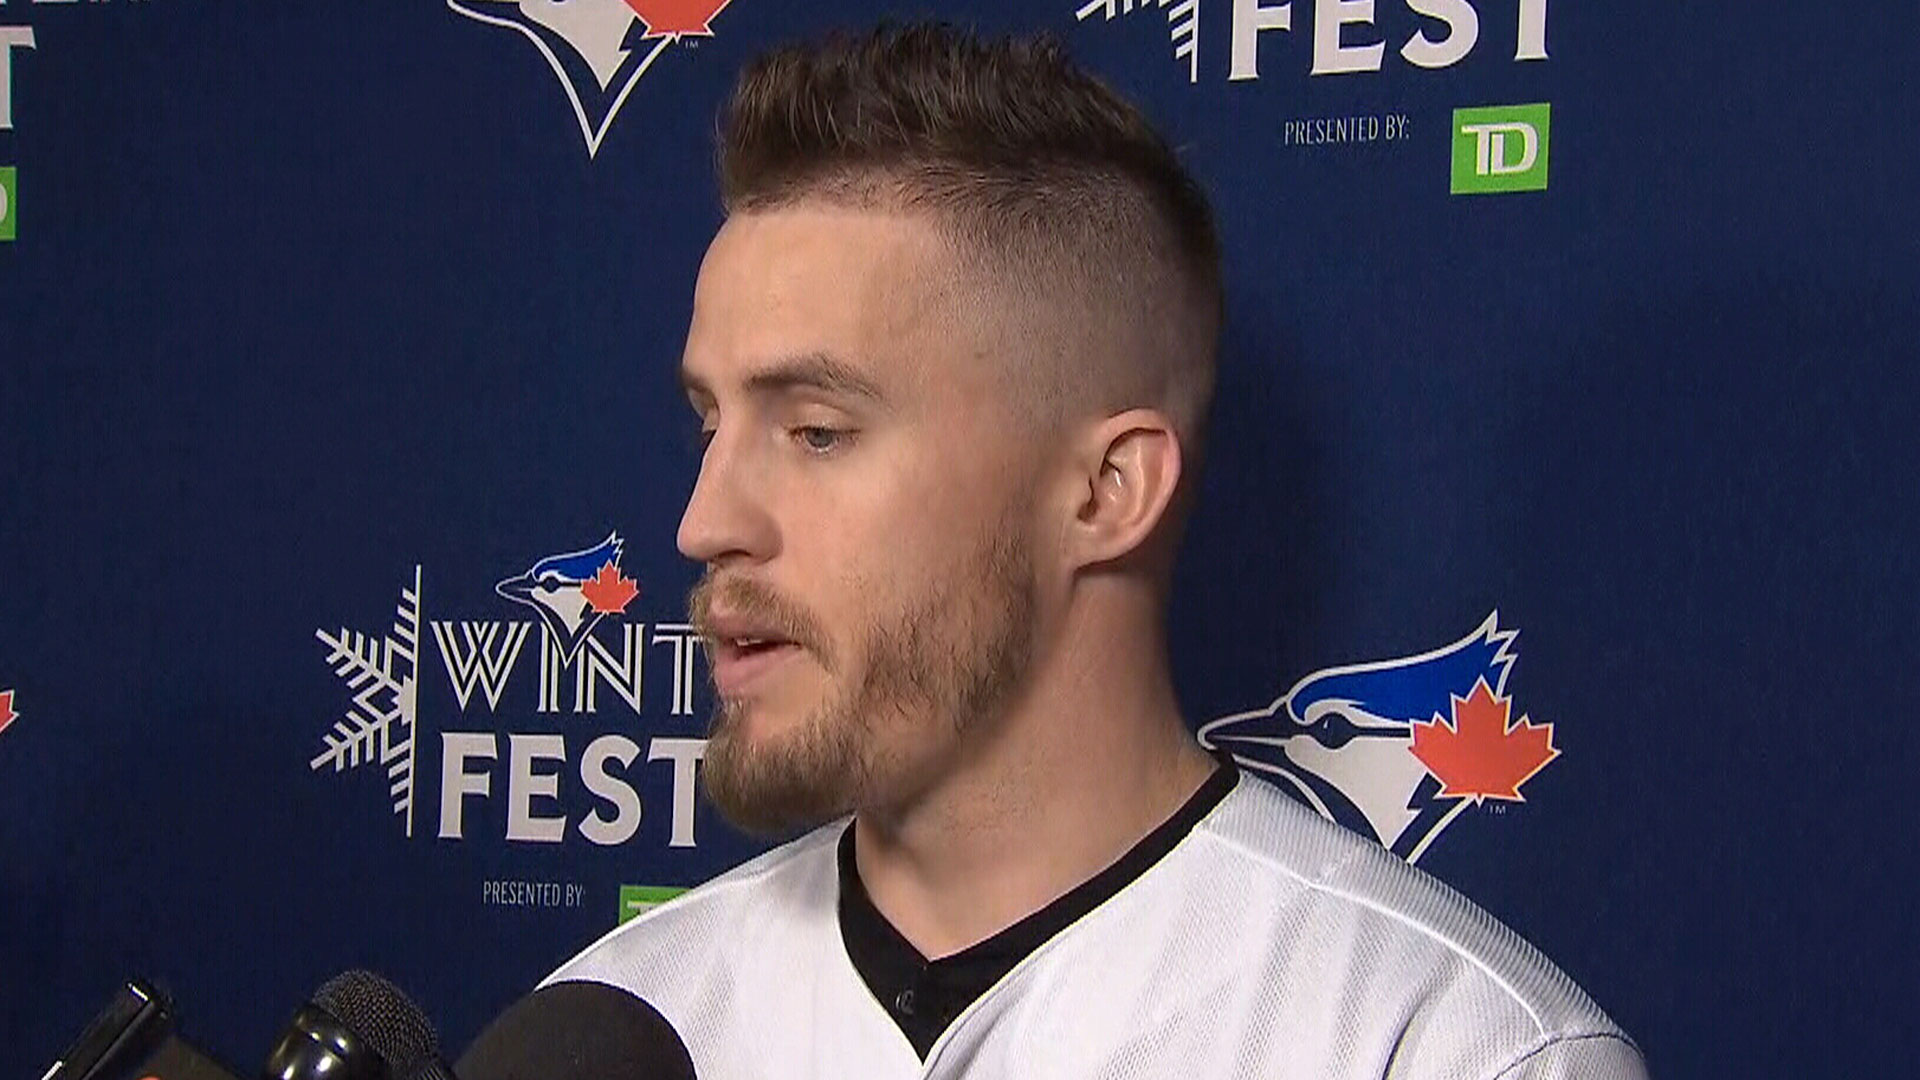 With young talent, Giles believes Jays will be 'better than most people think'